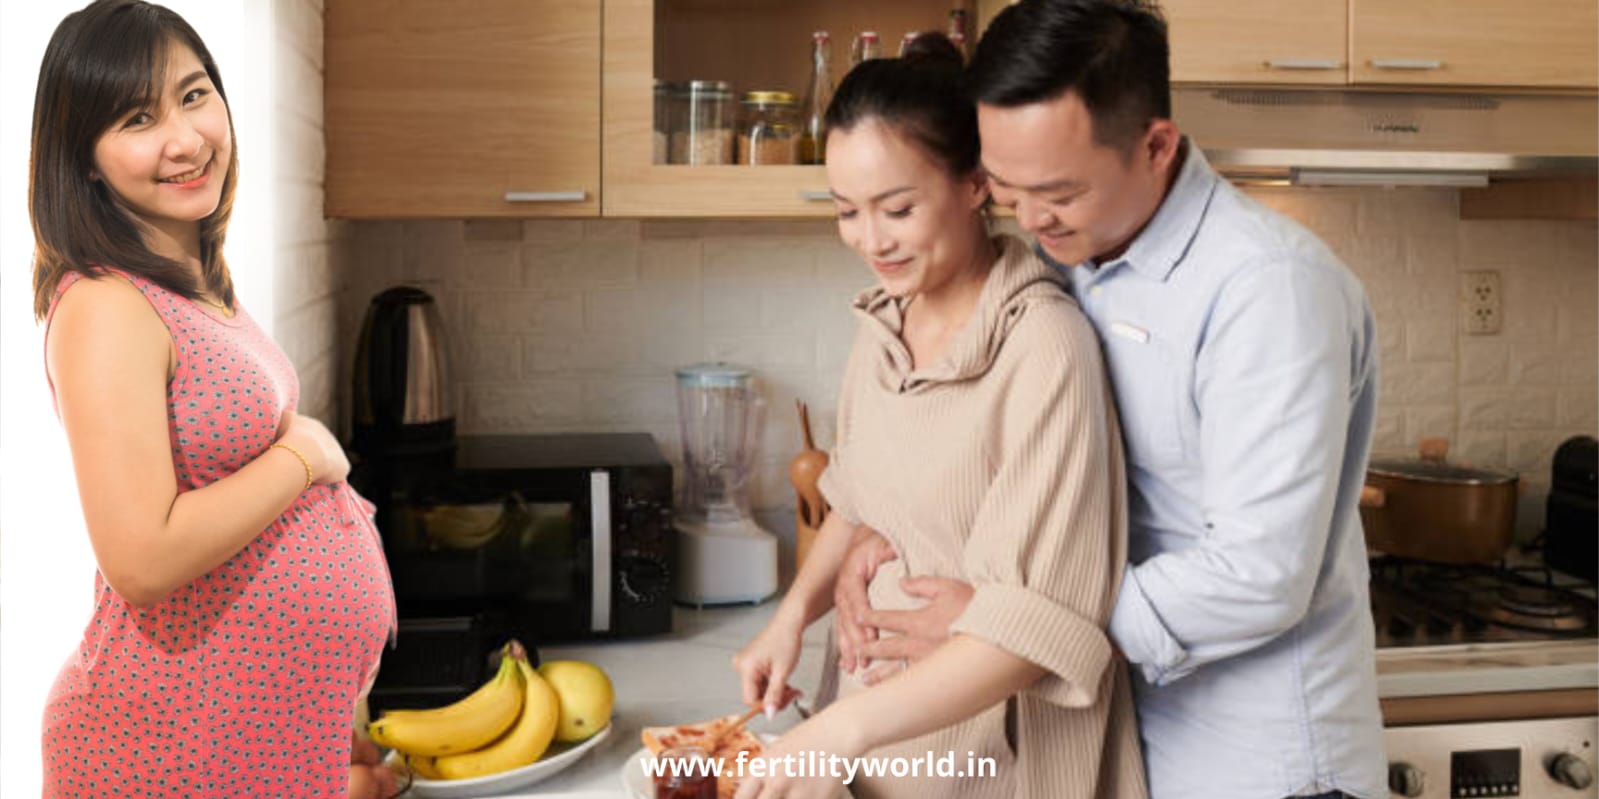 How to get a surrogate mom in the Philippines?